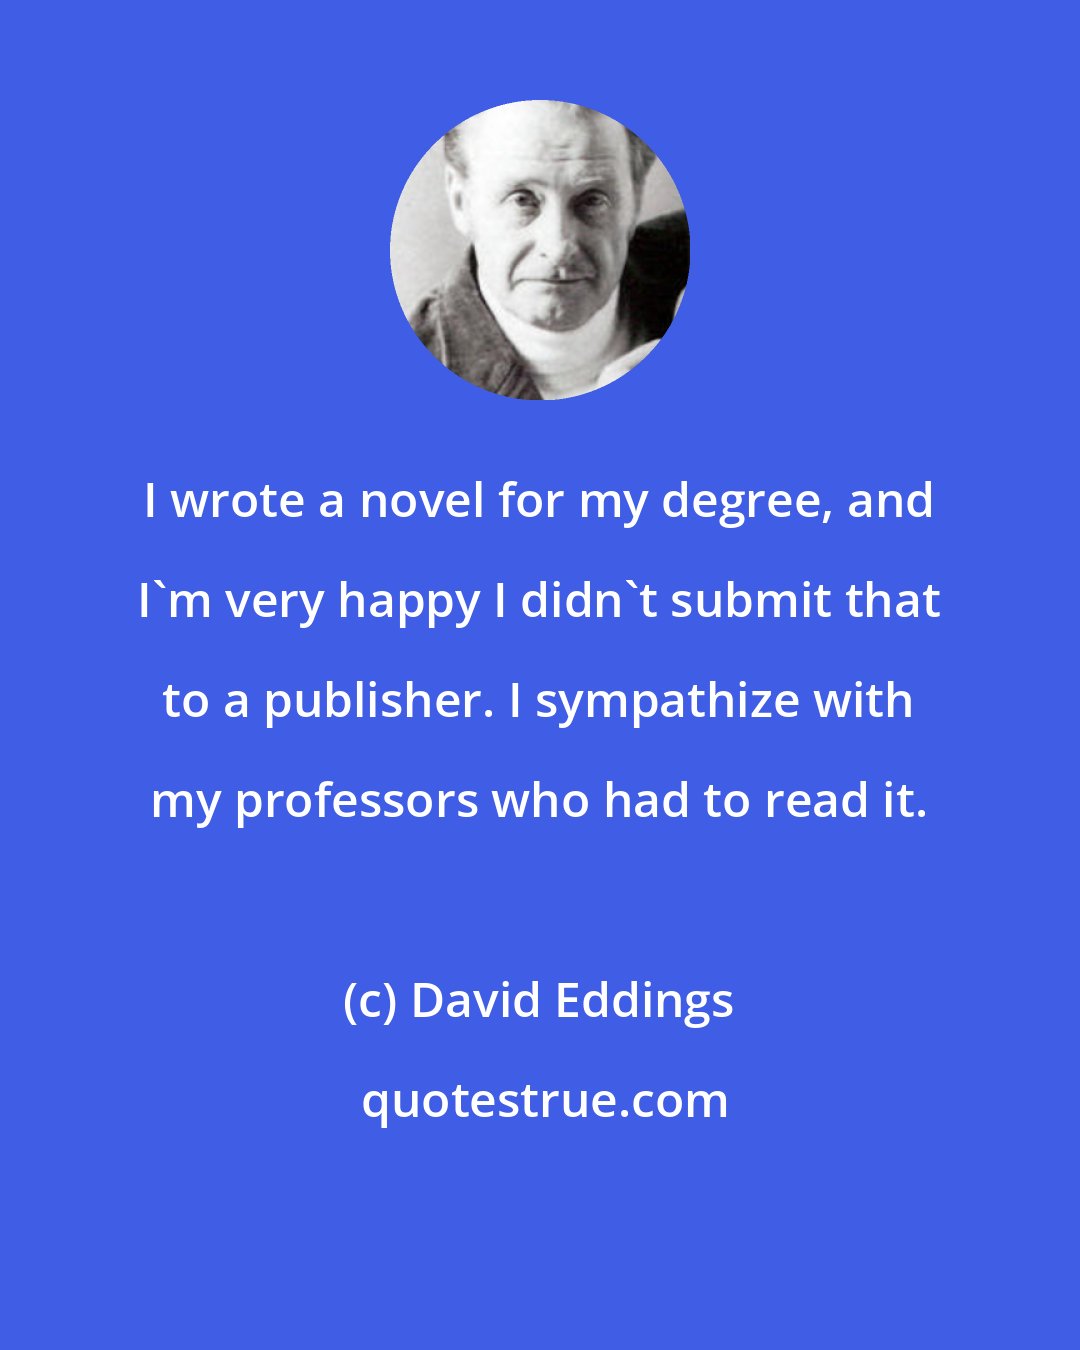 David Eddings: I wrote a novel for my degree, and I'm very happy I didn't submit that to a publisher. I sympathize with my professors who had to read it.